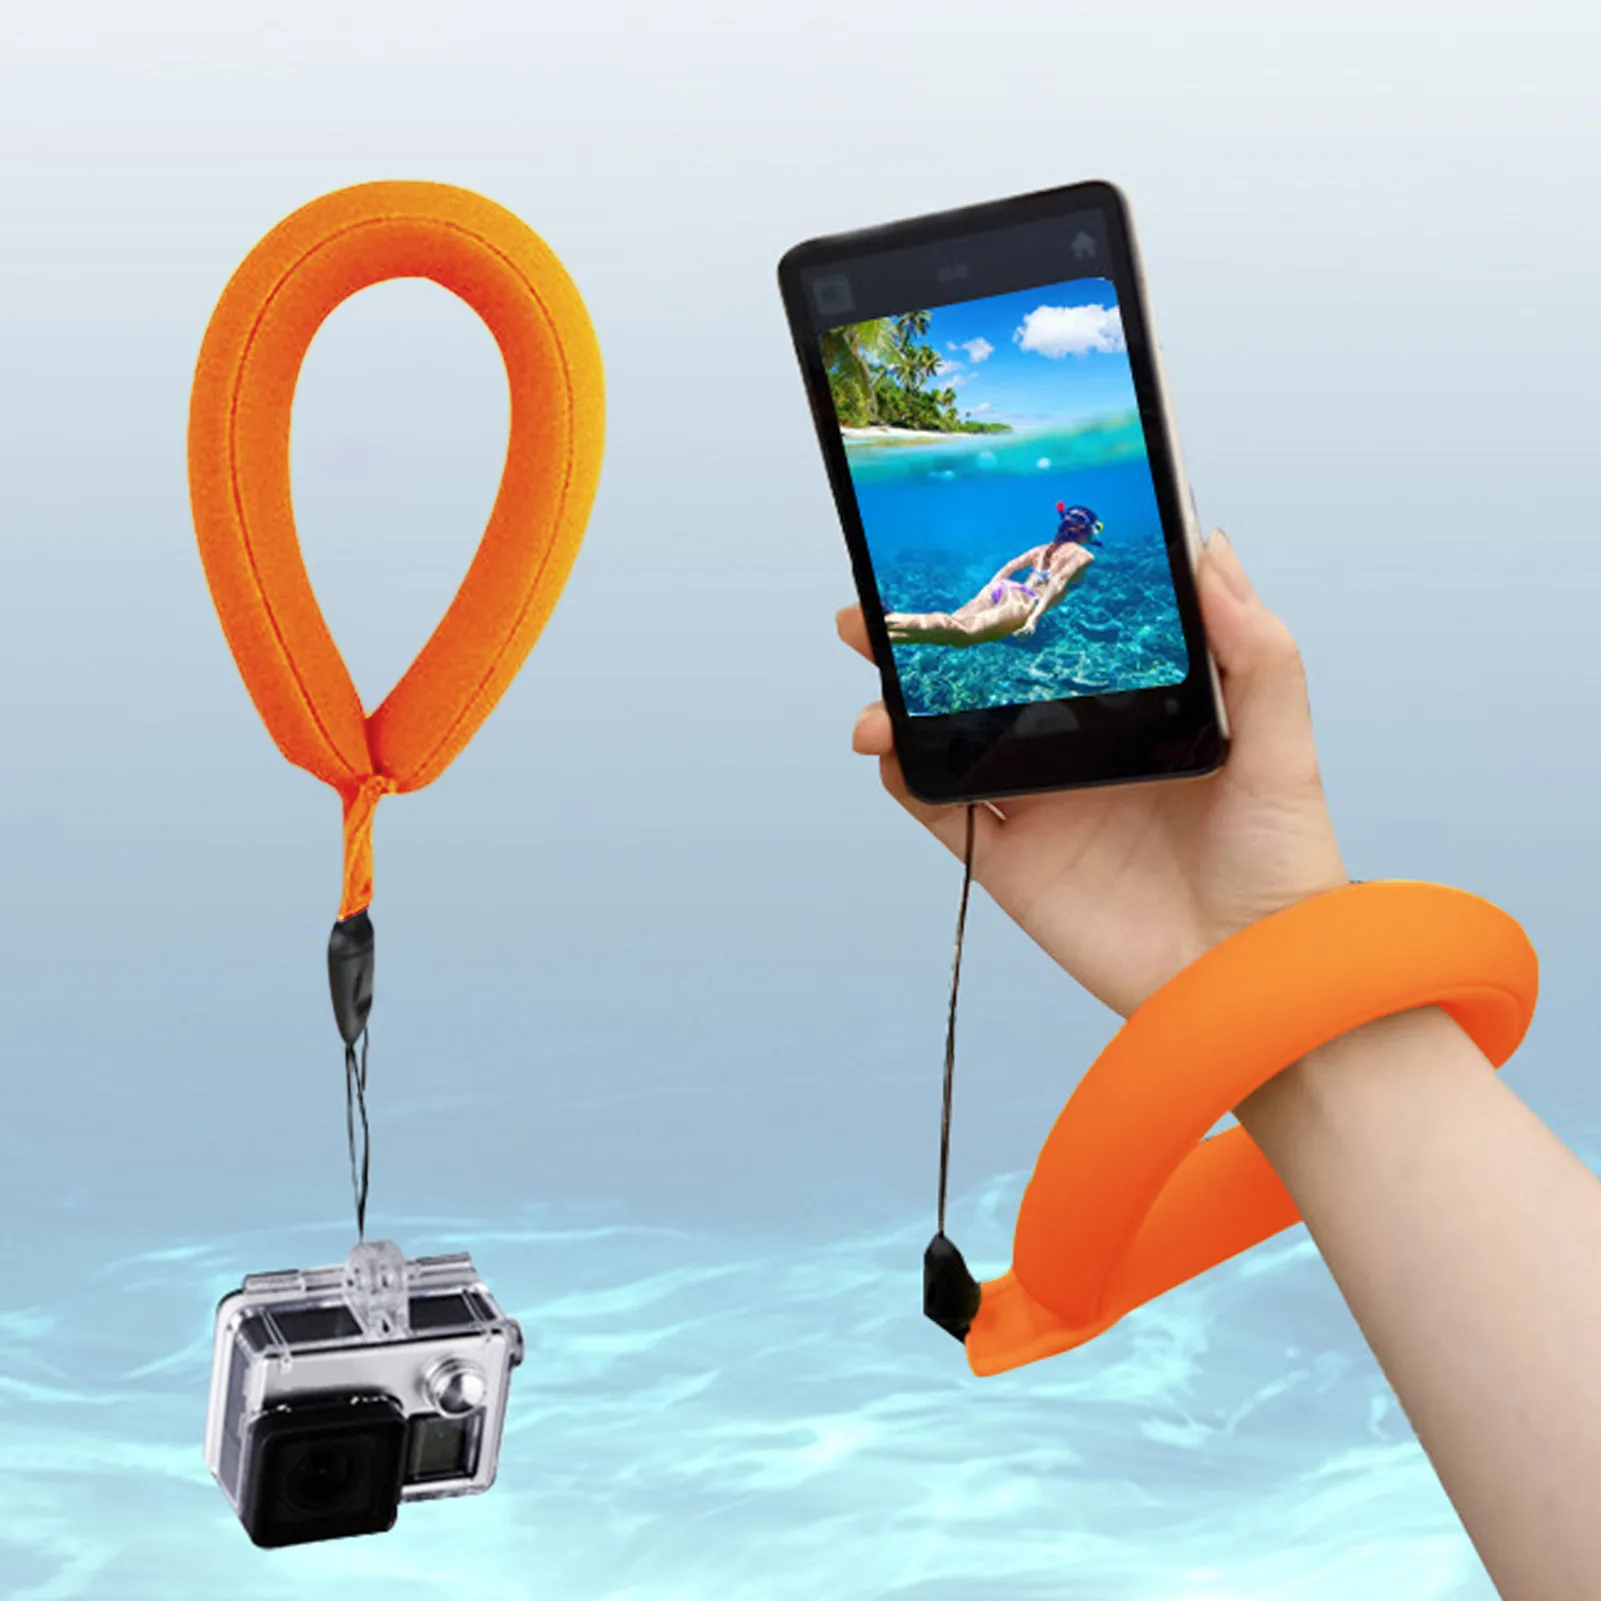 Waterproof Camera Float Universal Floating Strap for Underwater Camera Waterproof Pouch Case forGoPro Nik on Can on So ny Pentax ipx8 waterproof phone bag case for iphone 13 12 samsung xiaomi universal swimming underwater diving phone pouch bag case